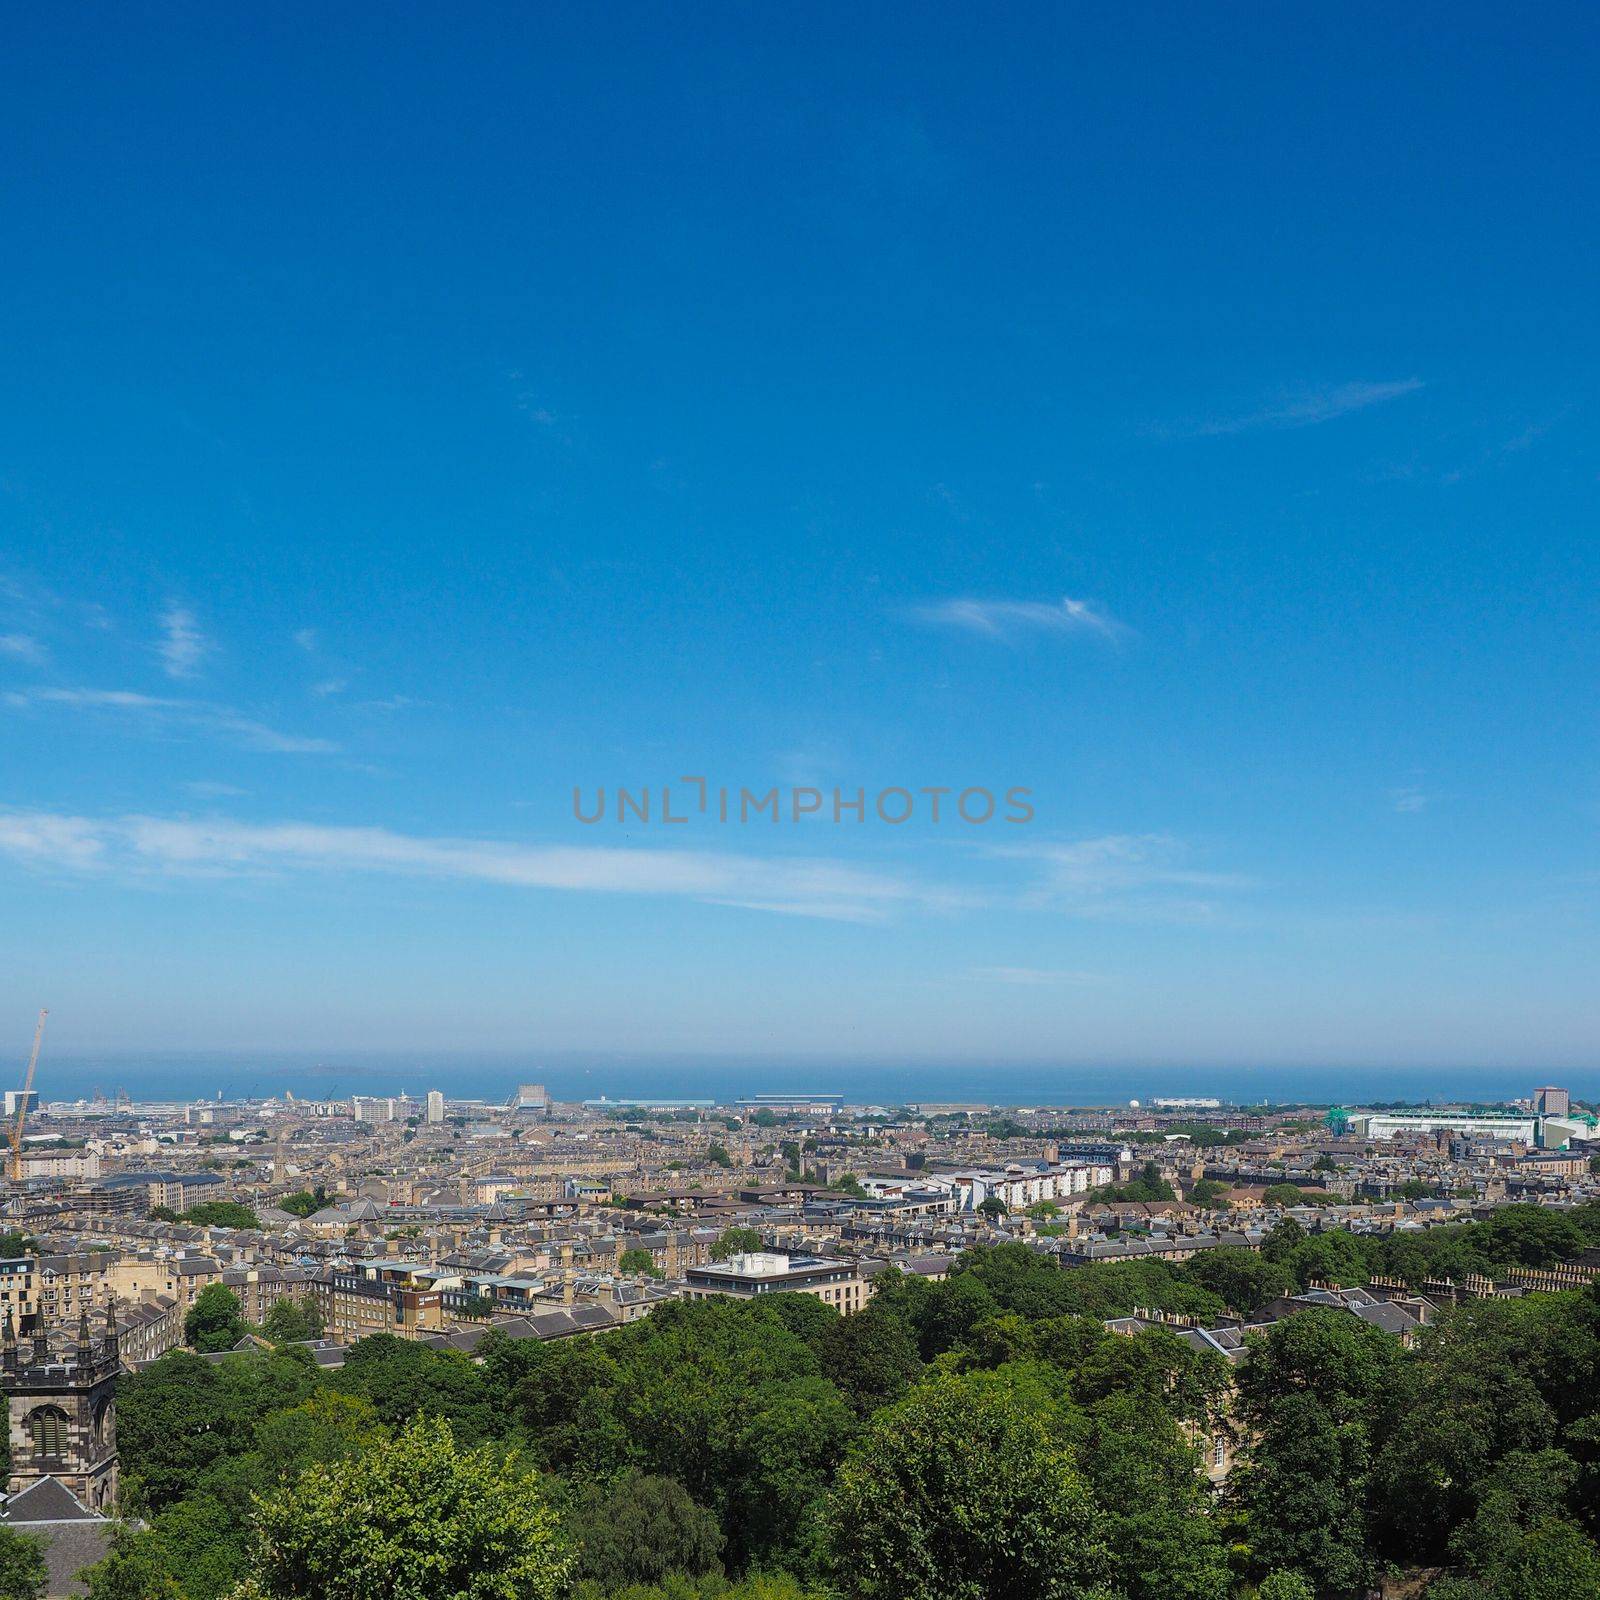 Aerial view of the city seen from Calton Hill in Edinburgh, UK